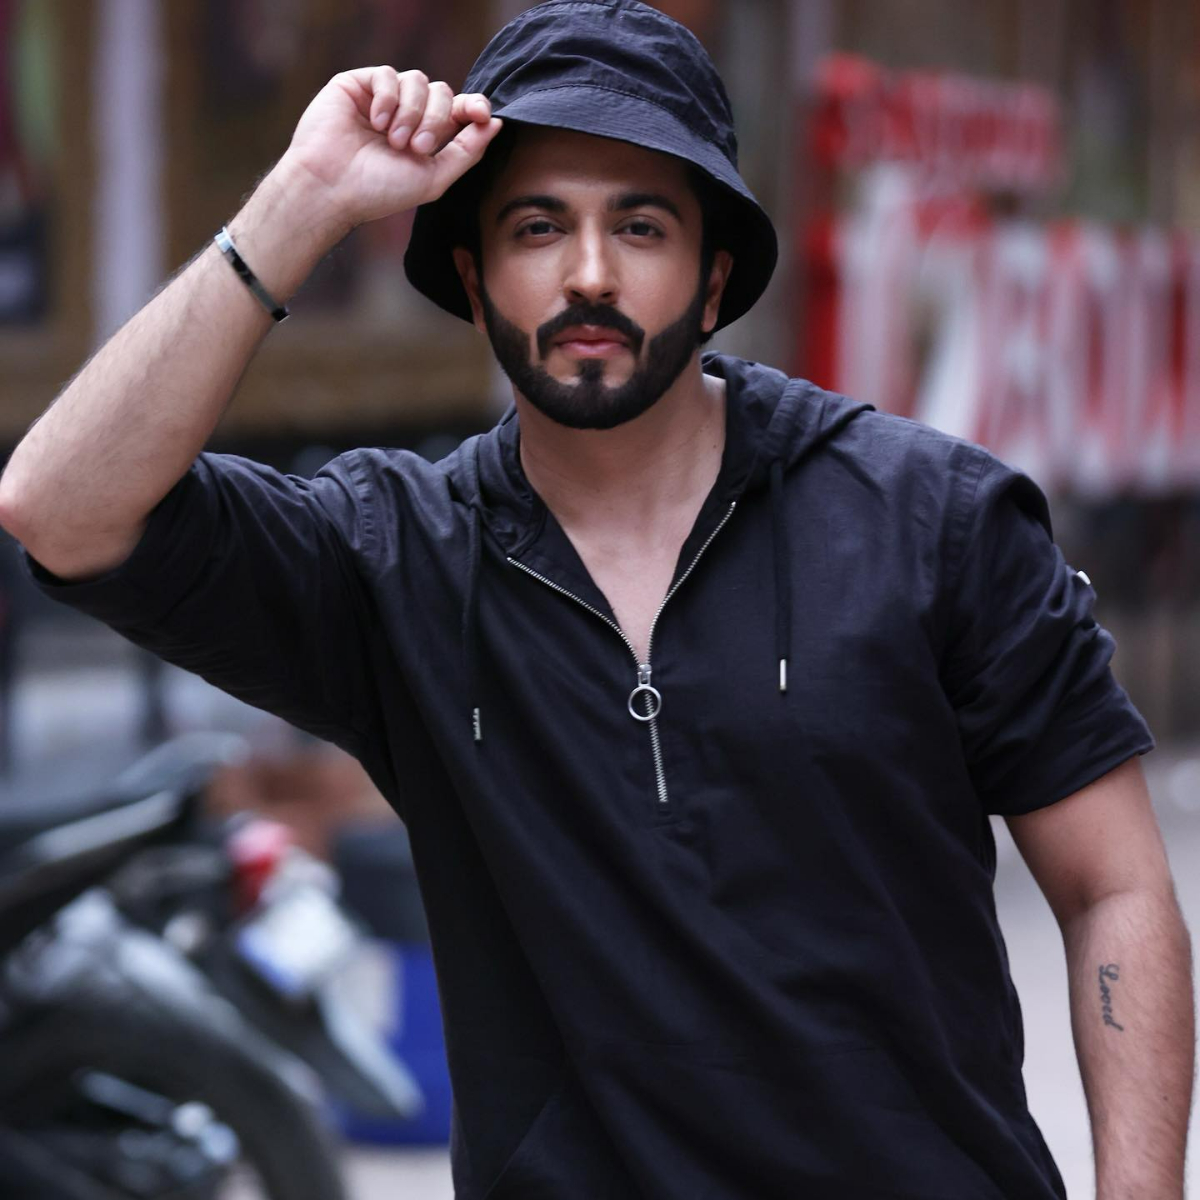 Jhalak Dikhhla Jaa 10 EXCLUSIVE: Dheeraj Dhoopar on 'new beginnings'; His first reality show in 14 years